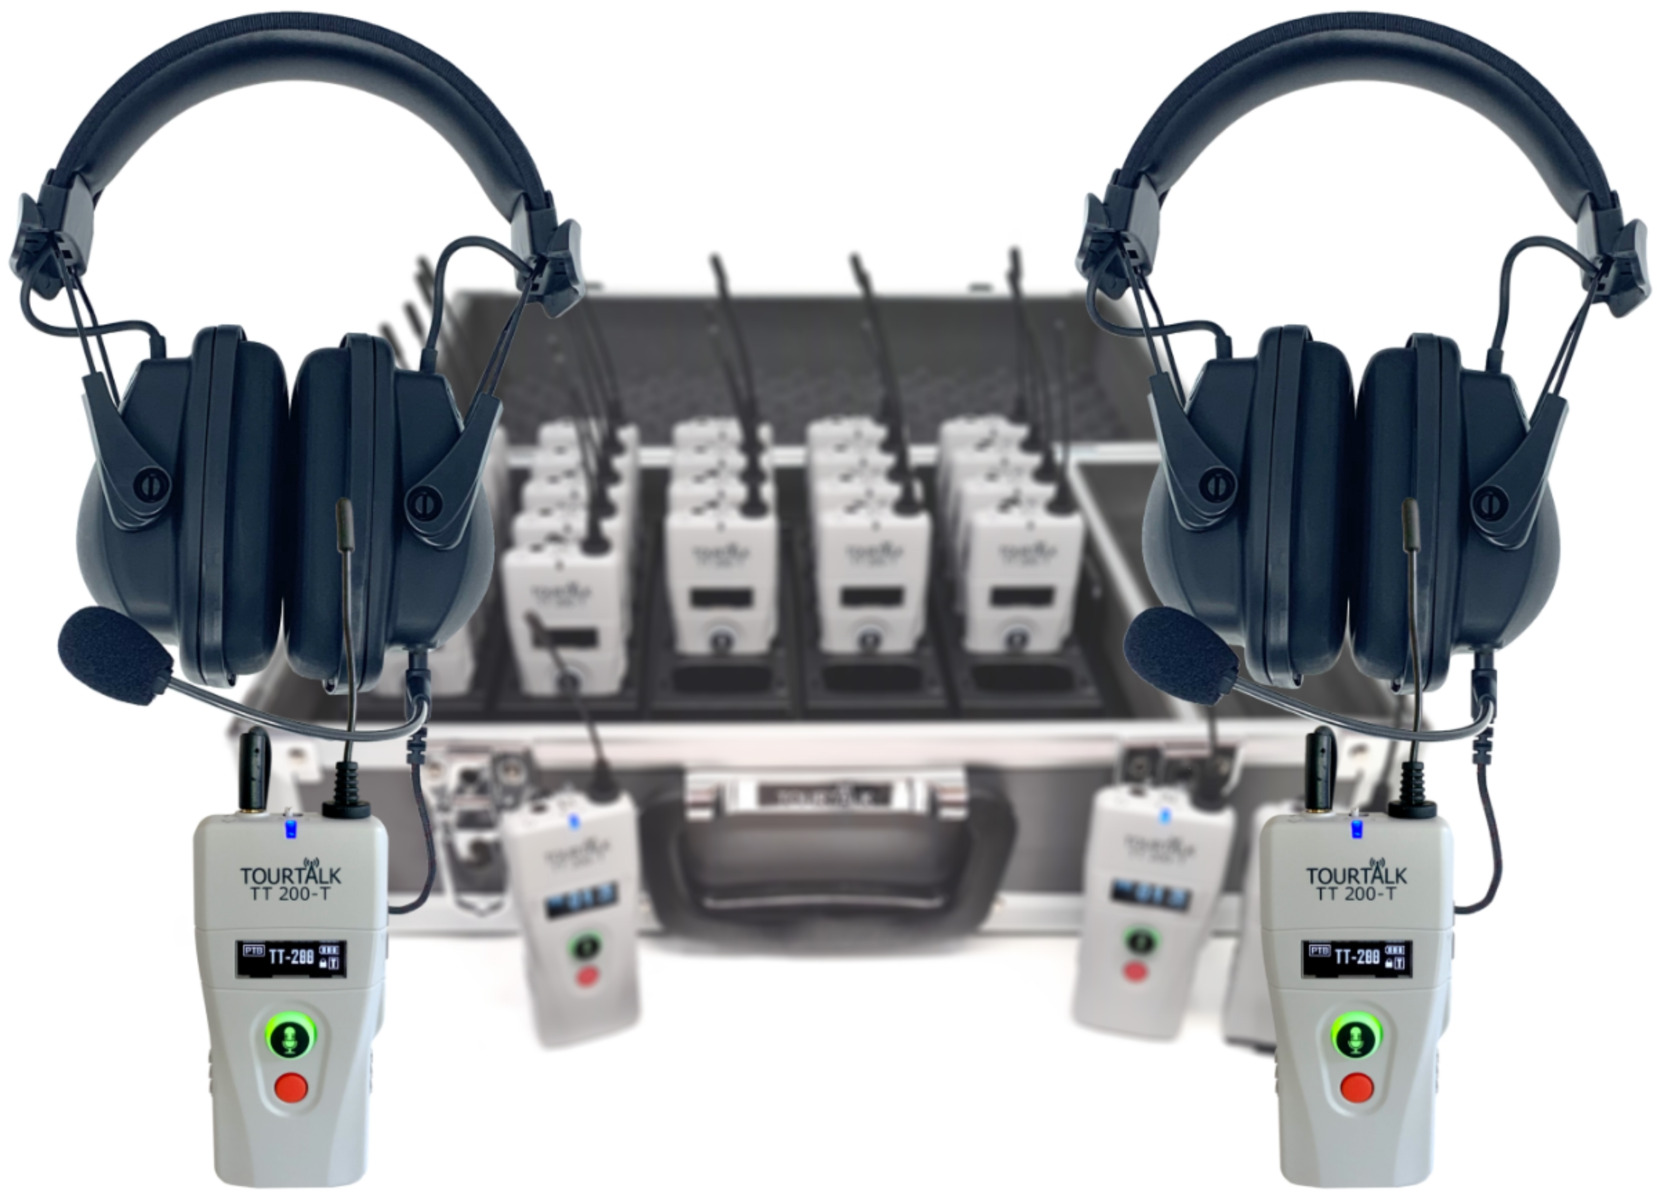 Tourtalk two-way headset communication system for staff